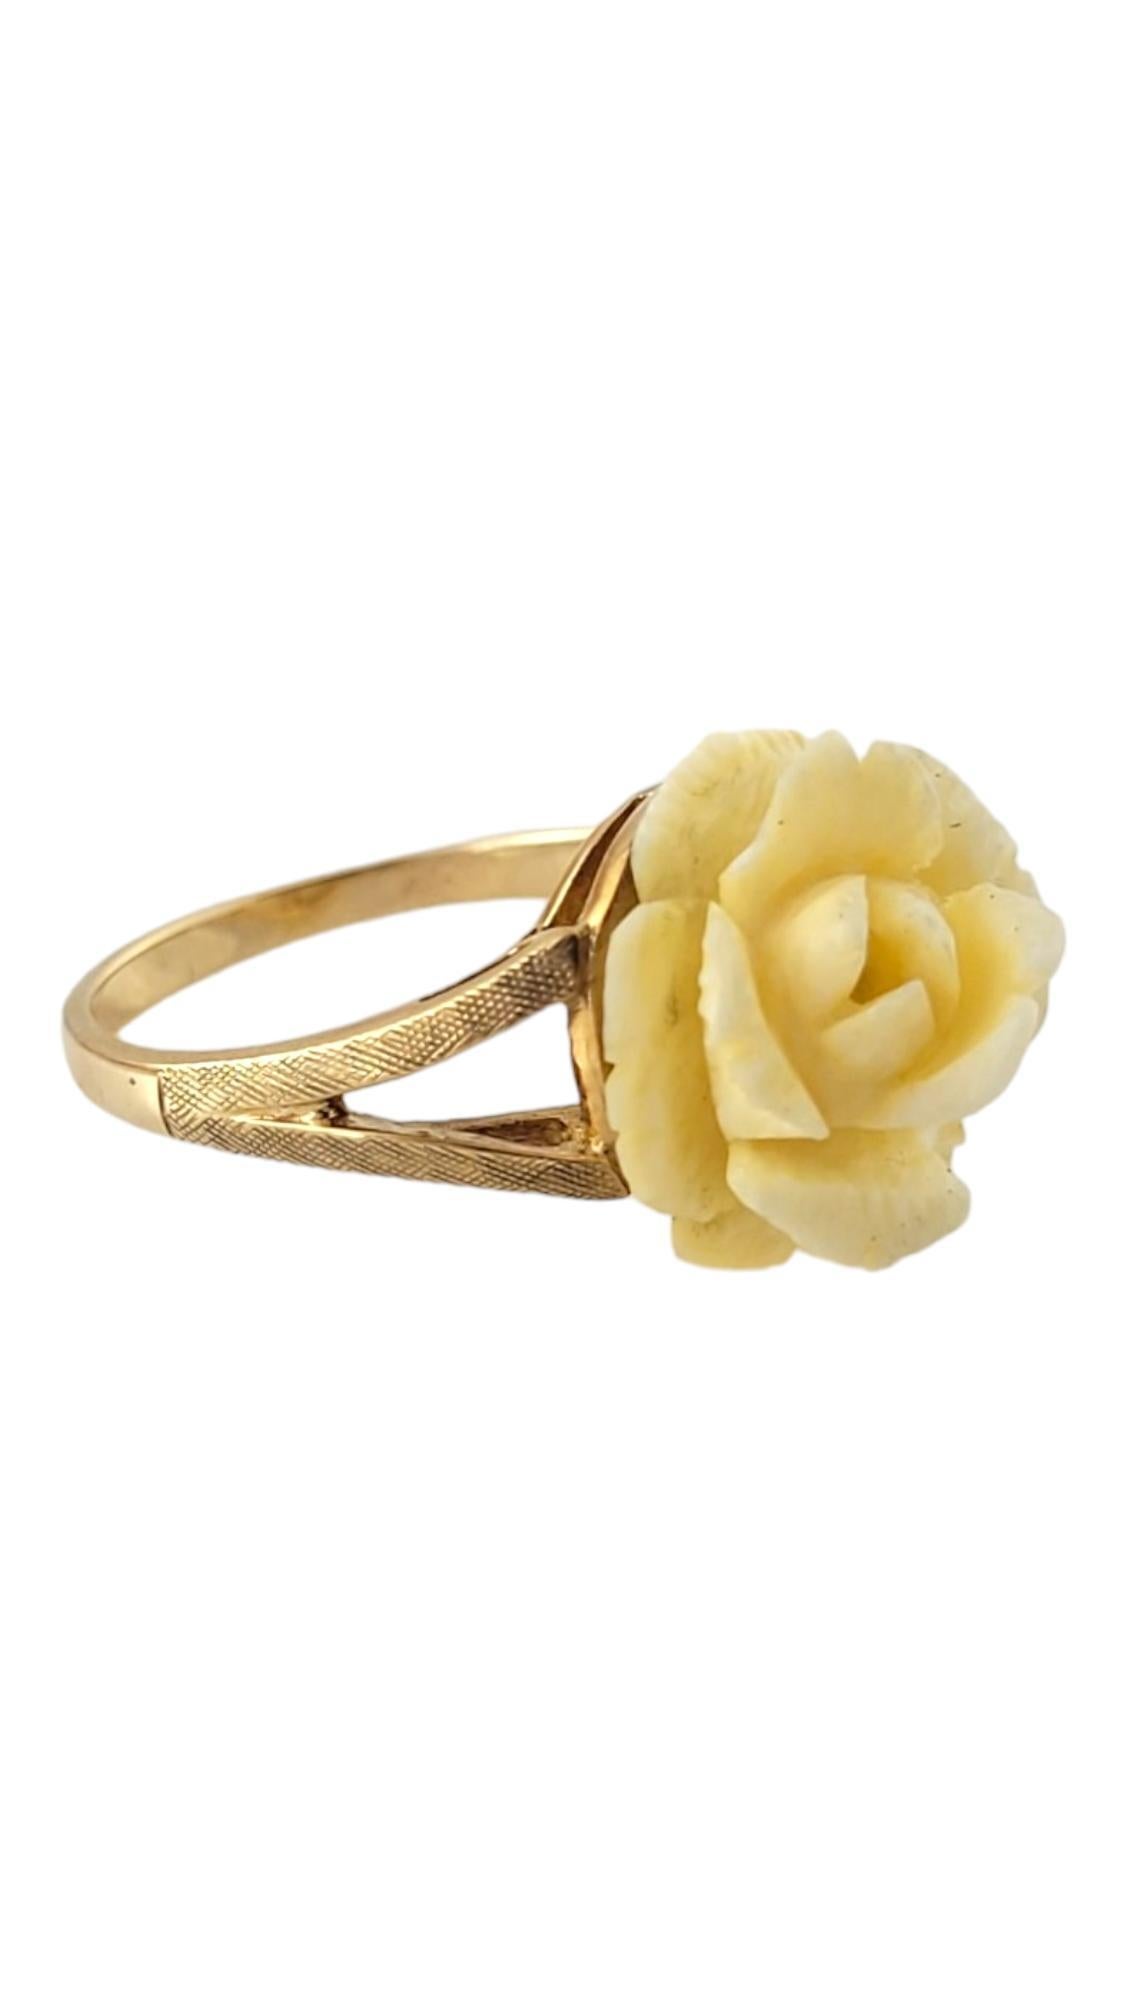 Vintage 10K yellow Gold White Rose Ring Size 5.25

This stunning statement ring is crafted from 10K yellow gold and features a gorgeous white rose in the front!

Ring size: 5.25
Shank: 2mm
Front: 13.7mm X 13.85mm X 11.4mm

Weight: 1.9 dwt/ 3.1